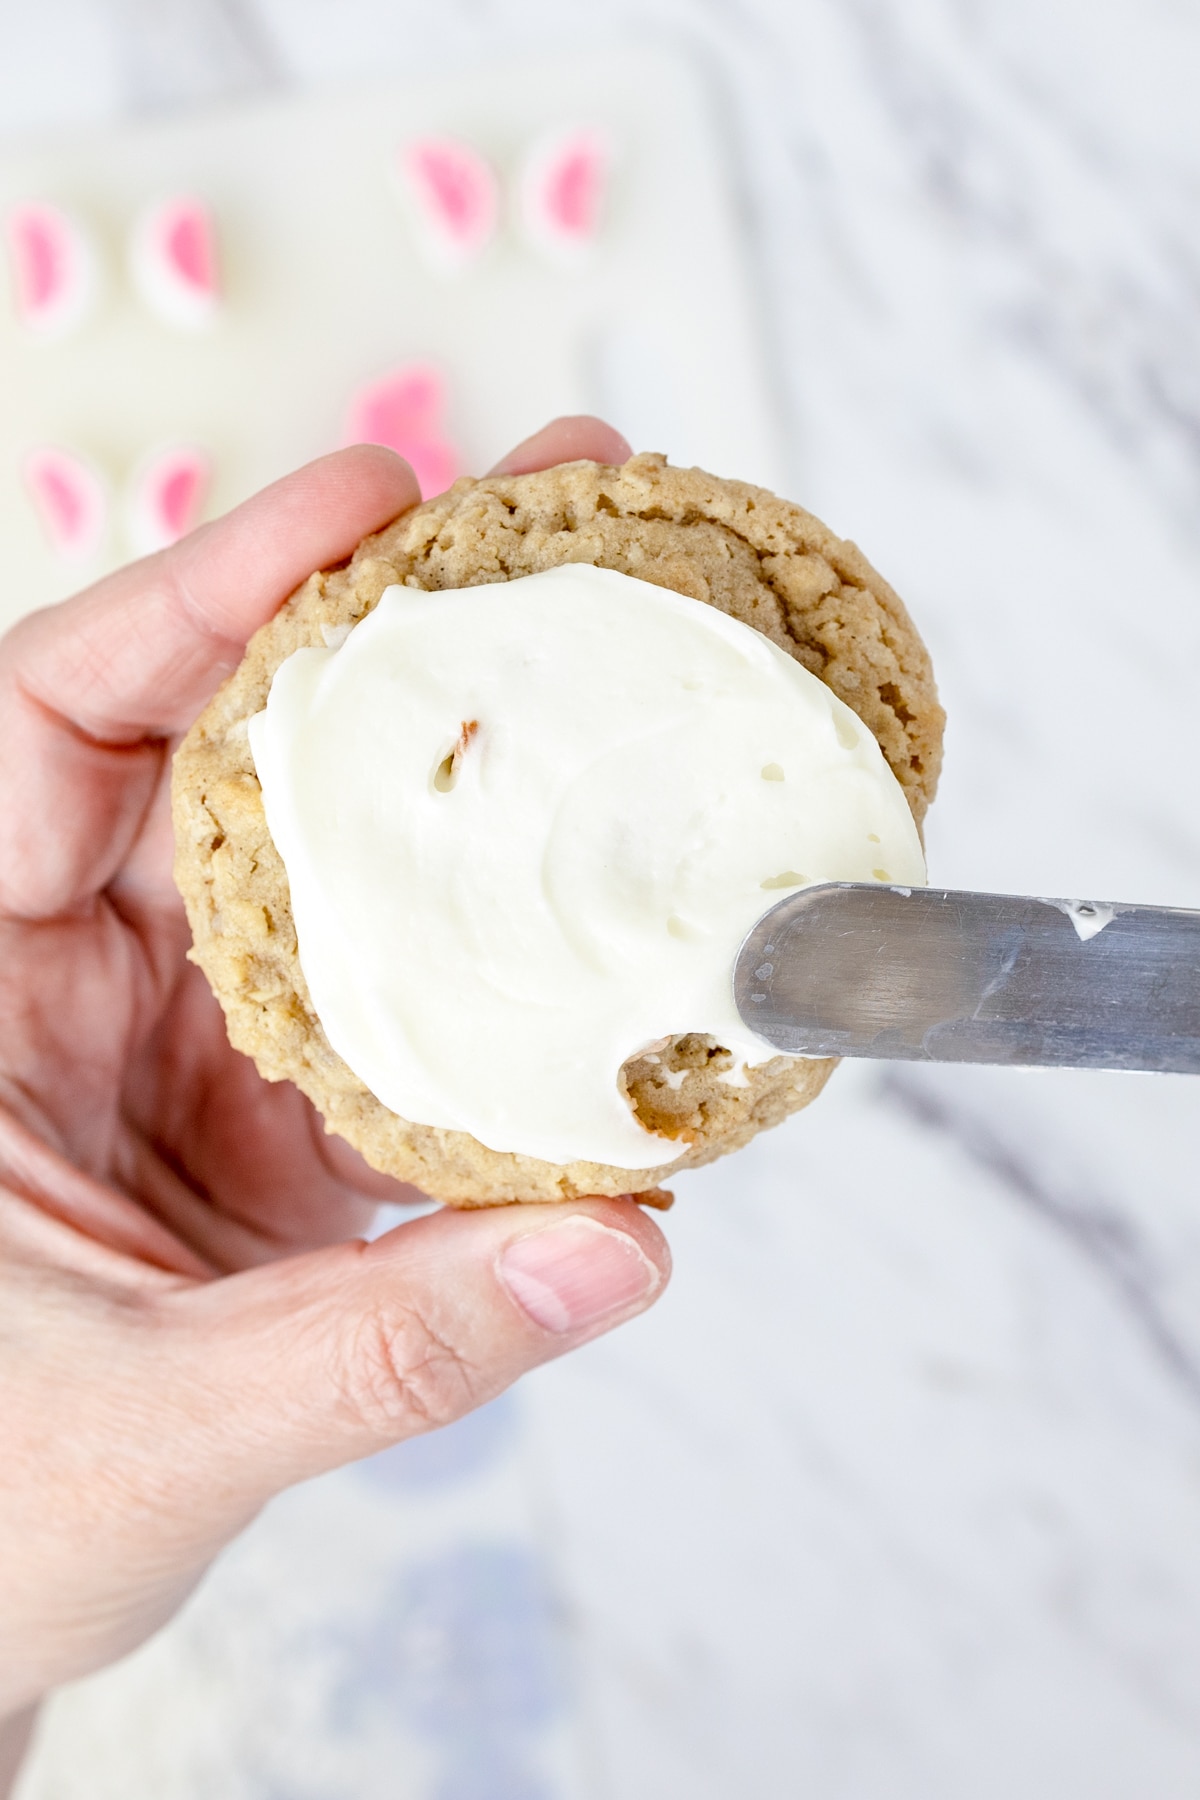 Top view of an oatmeal cookie having a white frosting spread on it with a knife. 